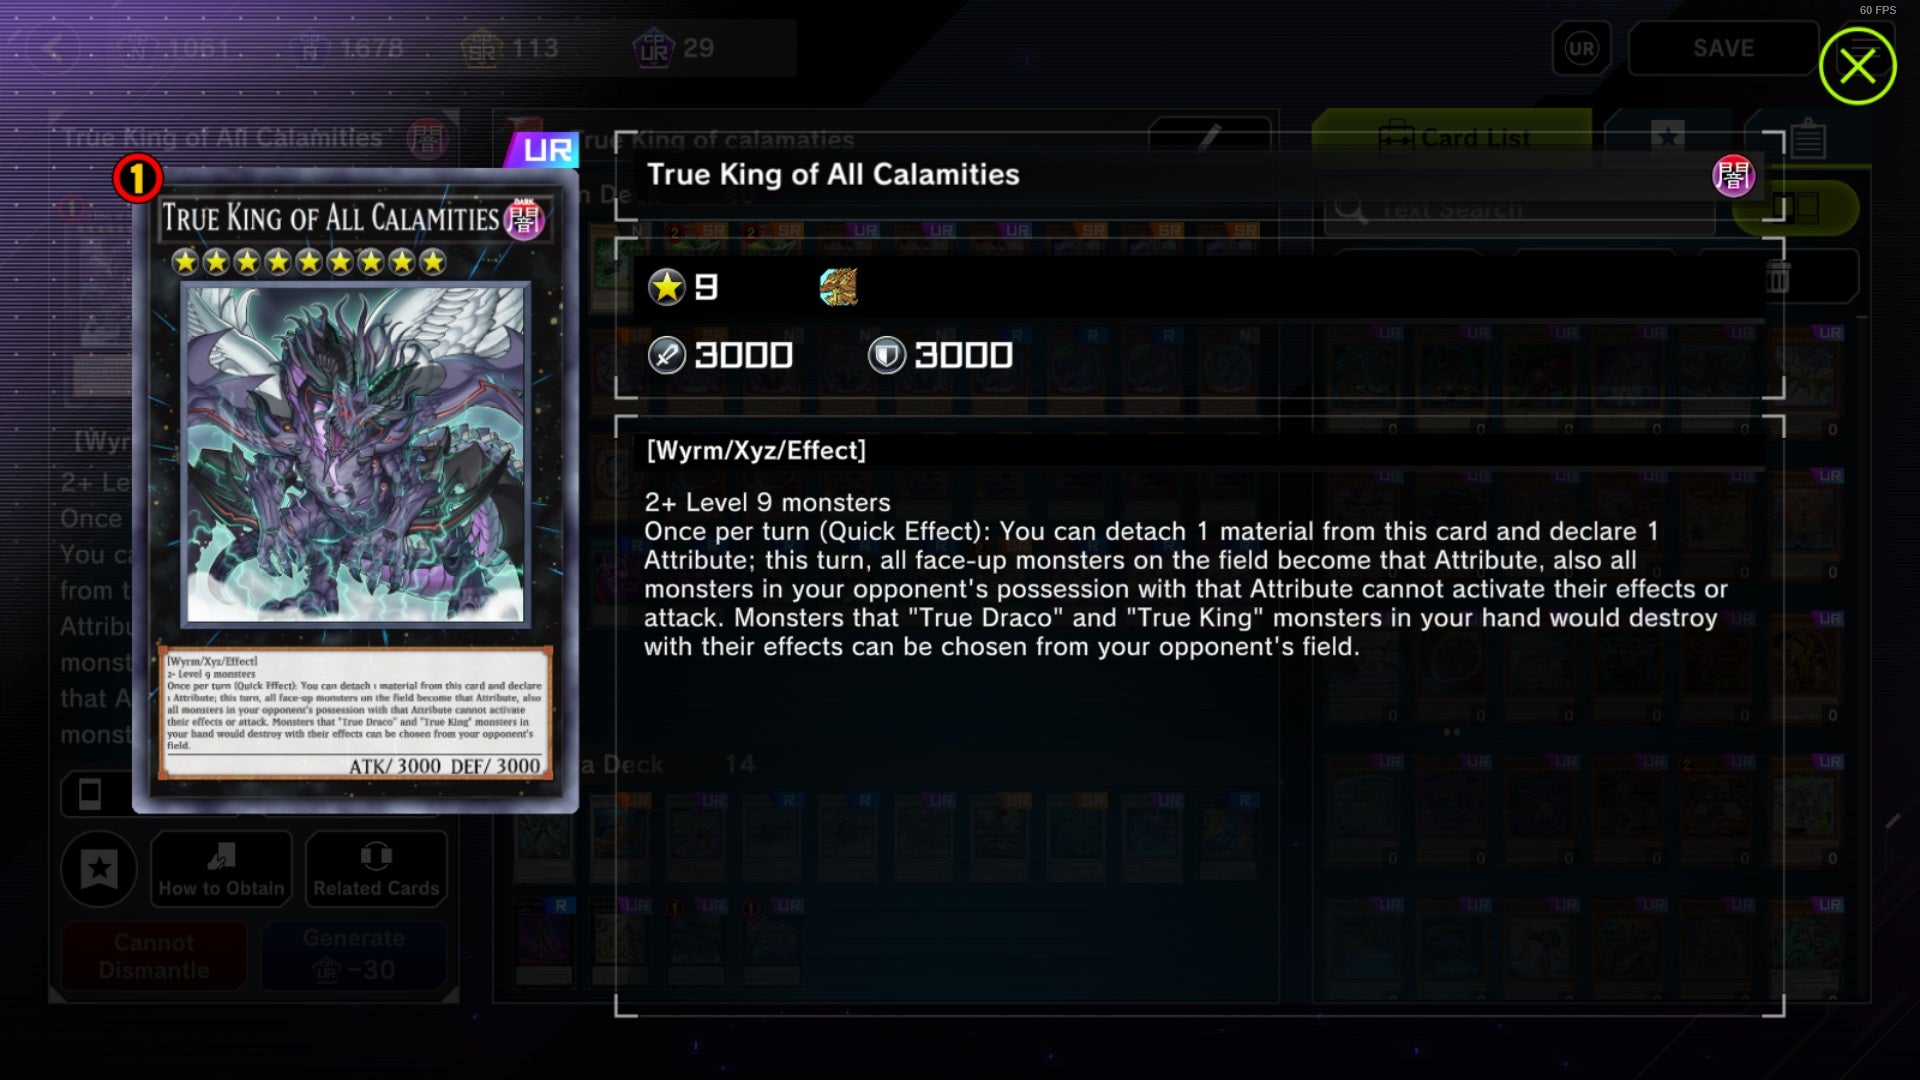 True King of All Calamities card with the text "Once per turn (Quick Effect): You can detach 1 material from this card and declare 1 Attribute; this turn, all face-up monsters on the field become that Attribute, also all monsters in your opponent's possession with that Attribute cannot activate their effects or attack. Monsters that 'True Draco' and 'True King' monsters in your hand would destroy with their effects can be chosen from your opponent's field."